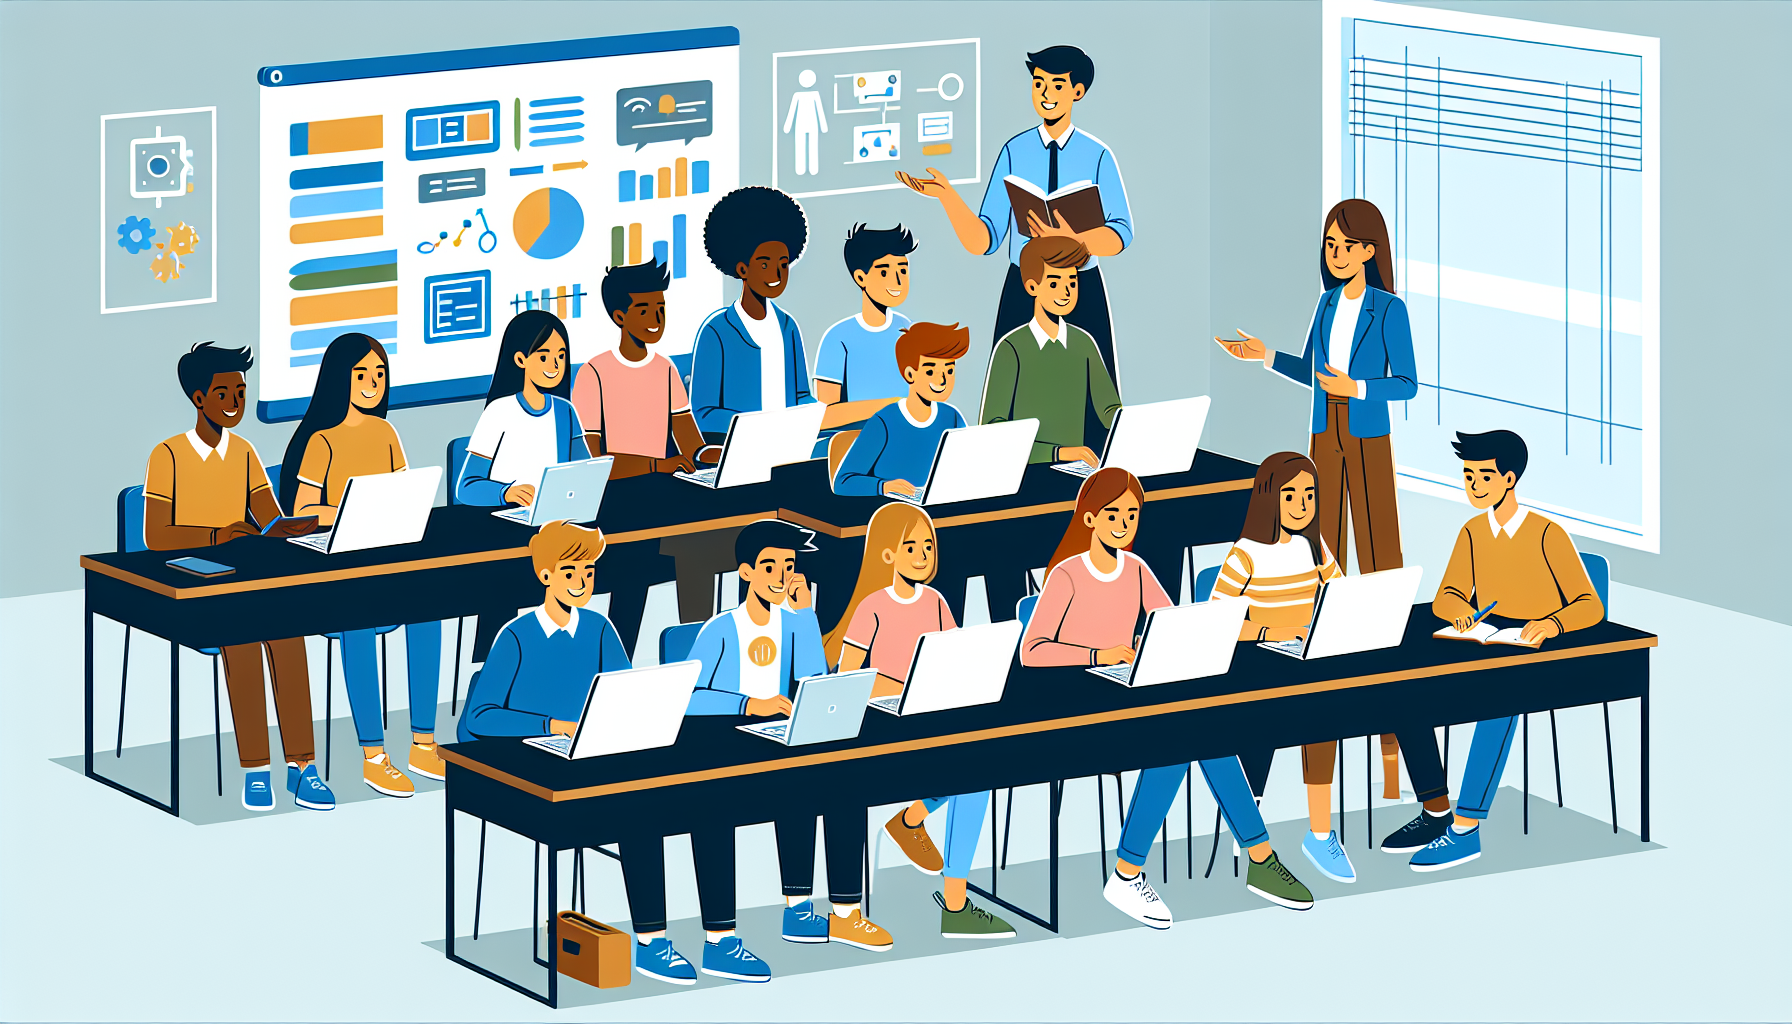 Enhancing Teamwork in Education: How to Build a Collaborative Classroom using Microsoft Teams